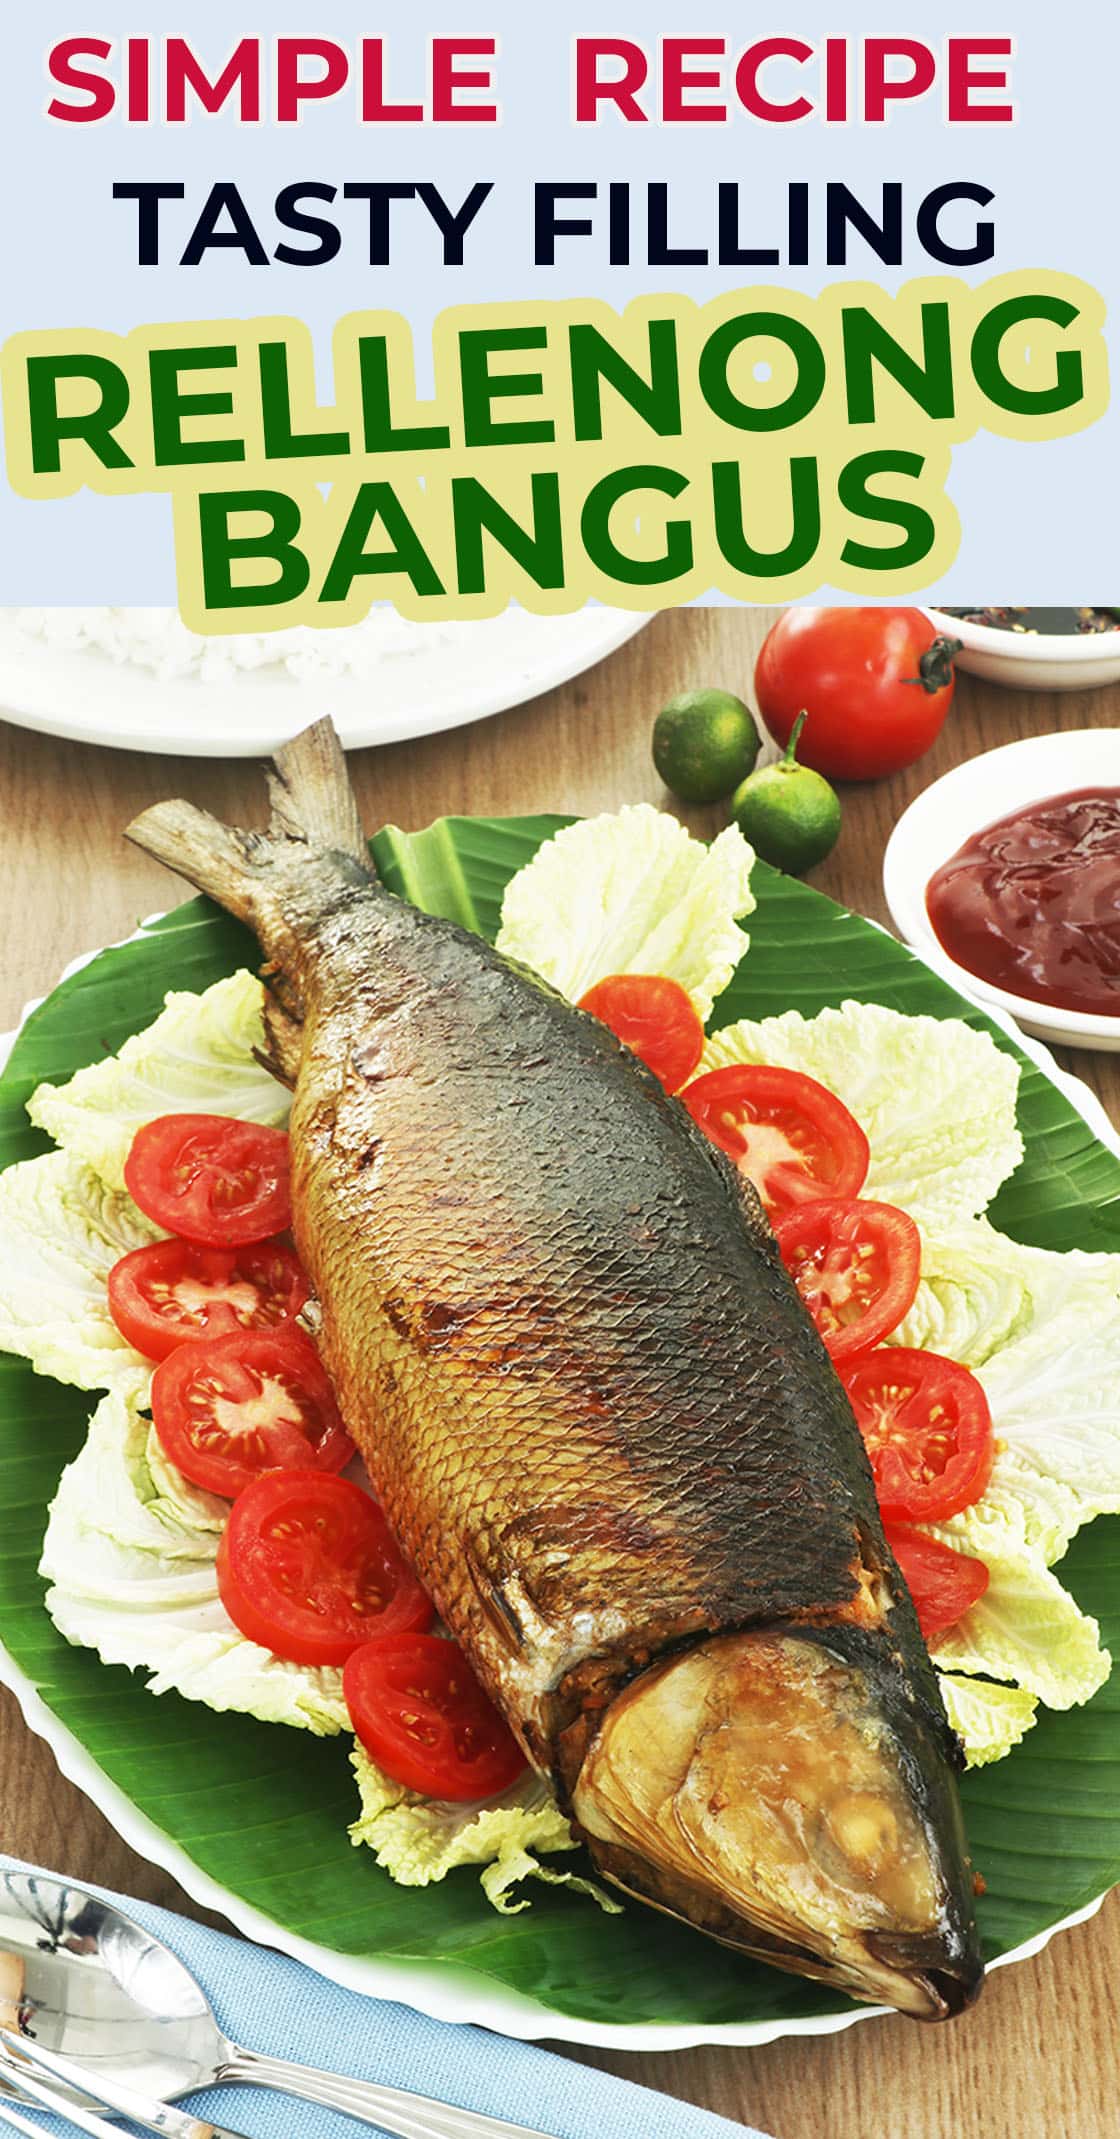 Step by Step Instruction on How to Cook Rellenong Bangus